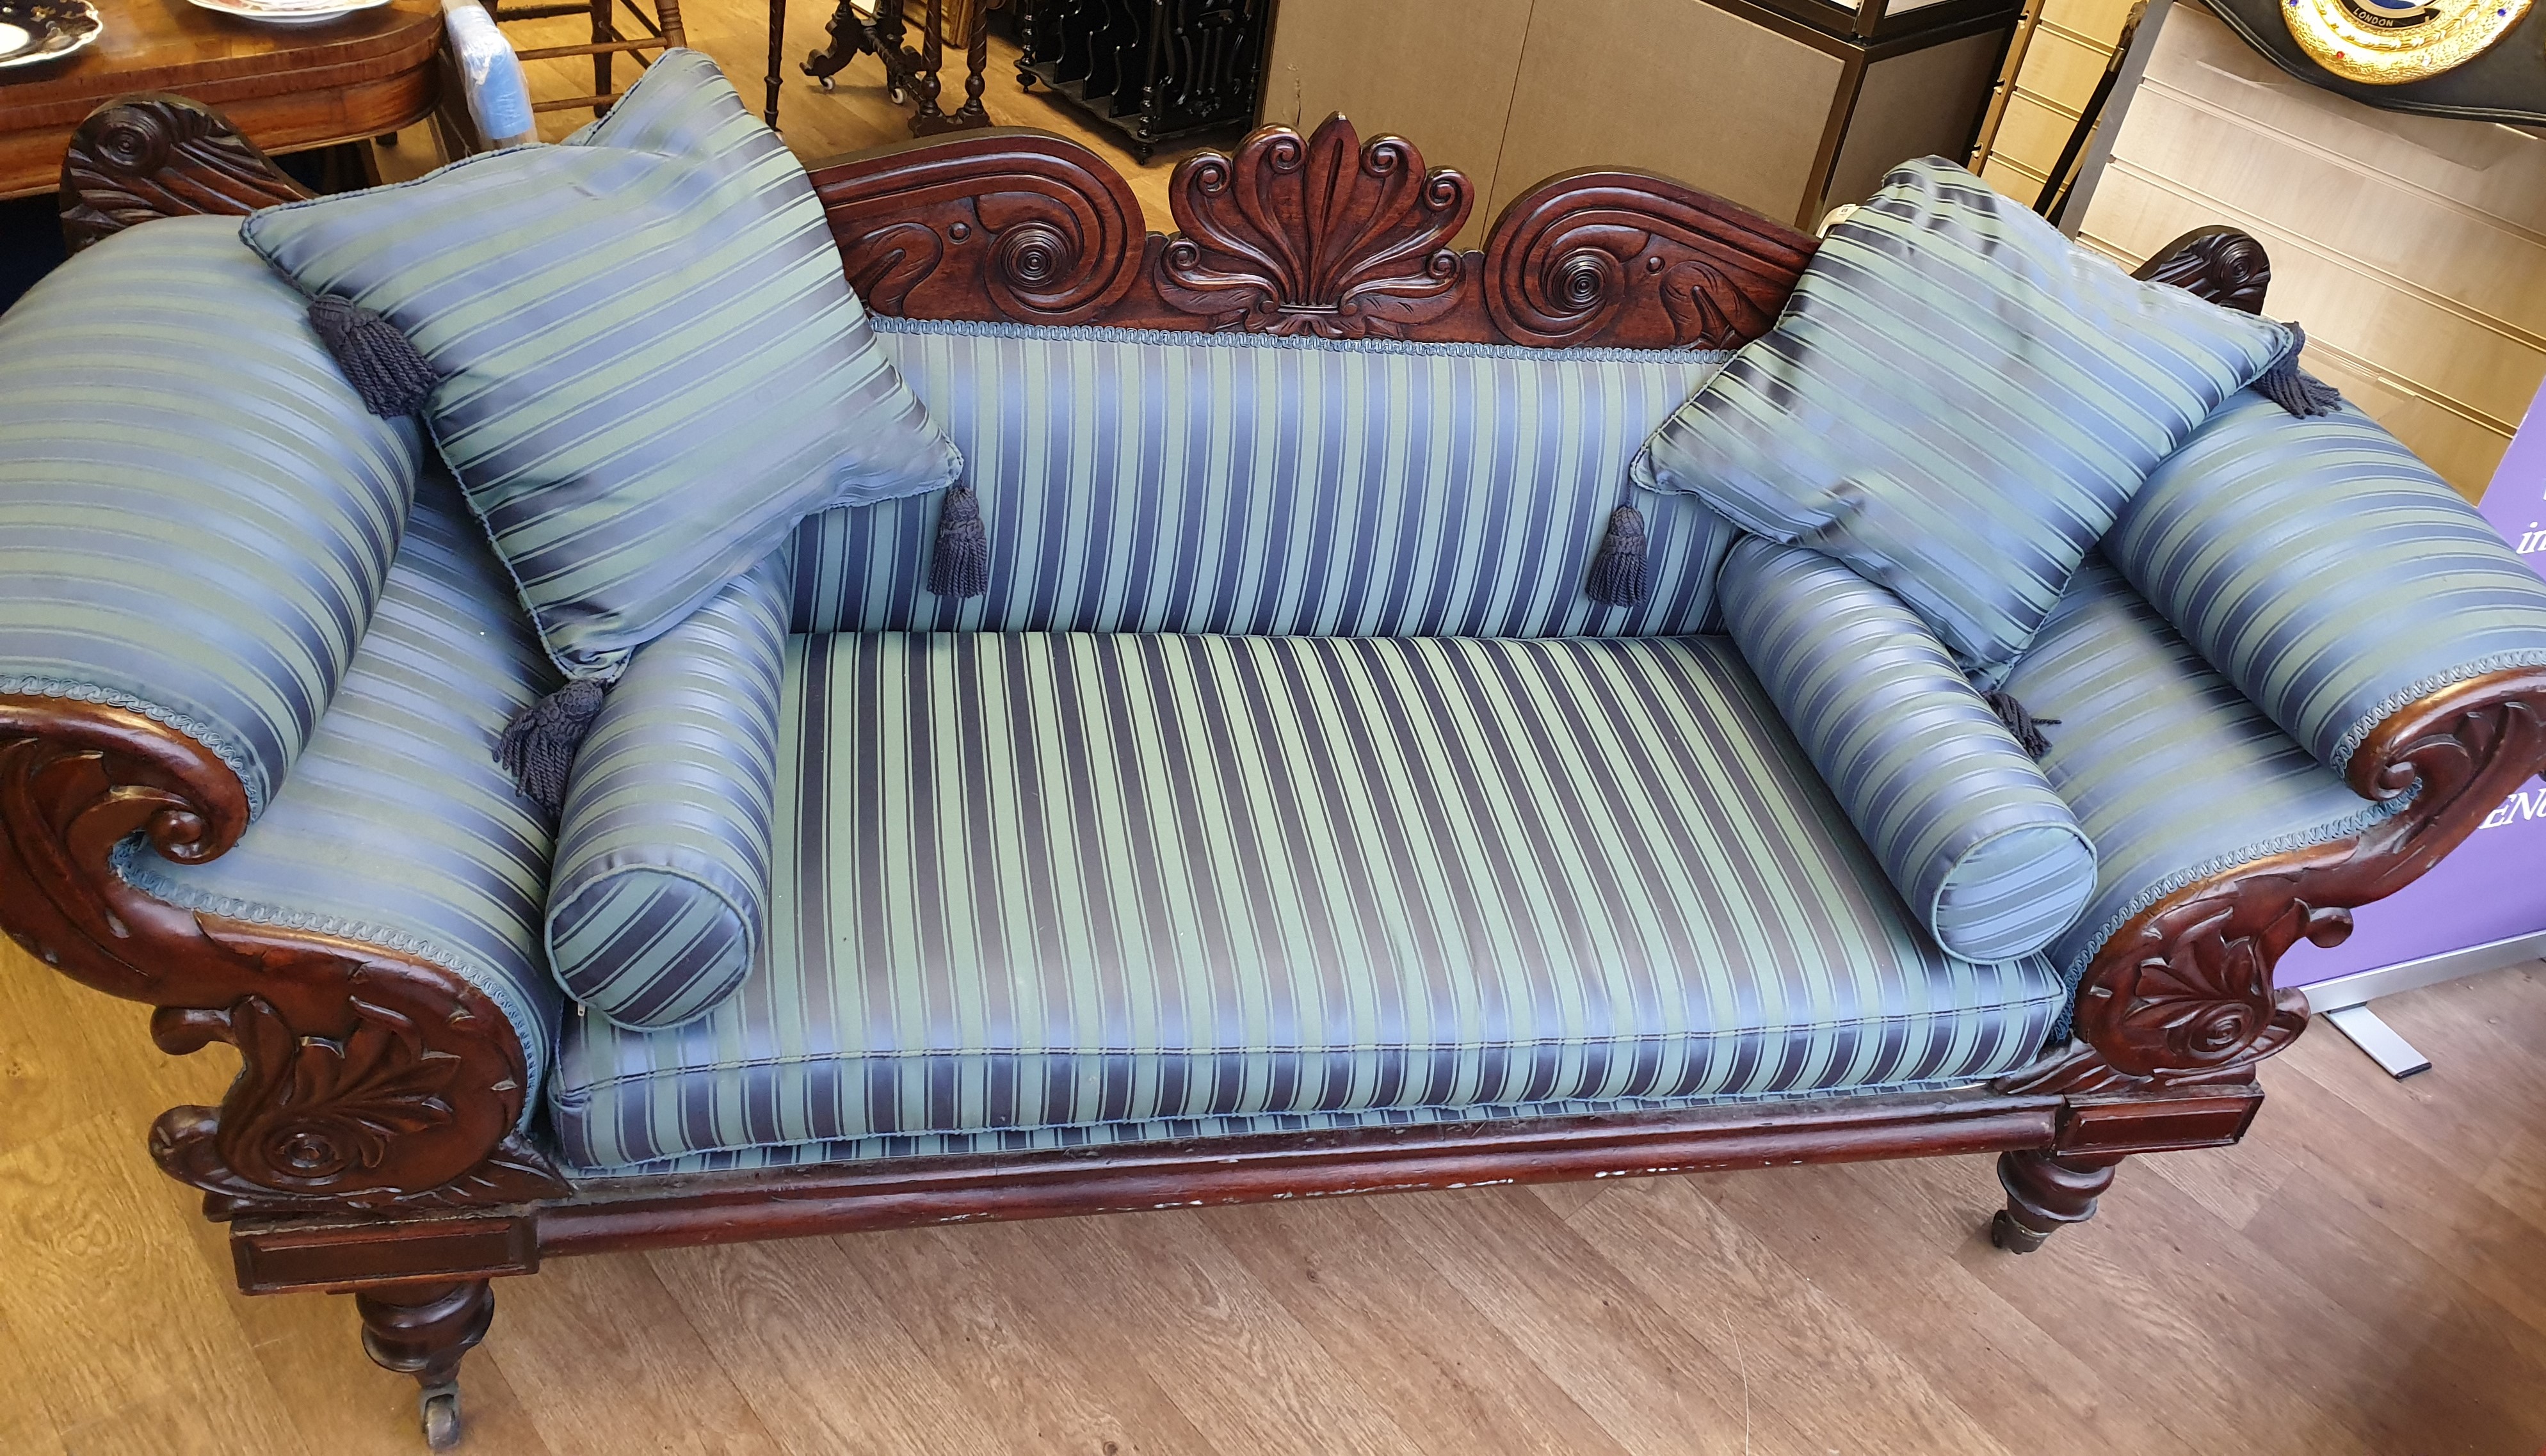 Victorian Handmade Sofa on Casters, been sympathetically restored with a blue satin stripe finish, - Image 10 of 16